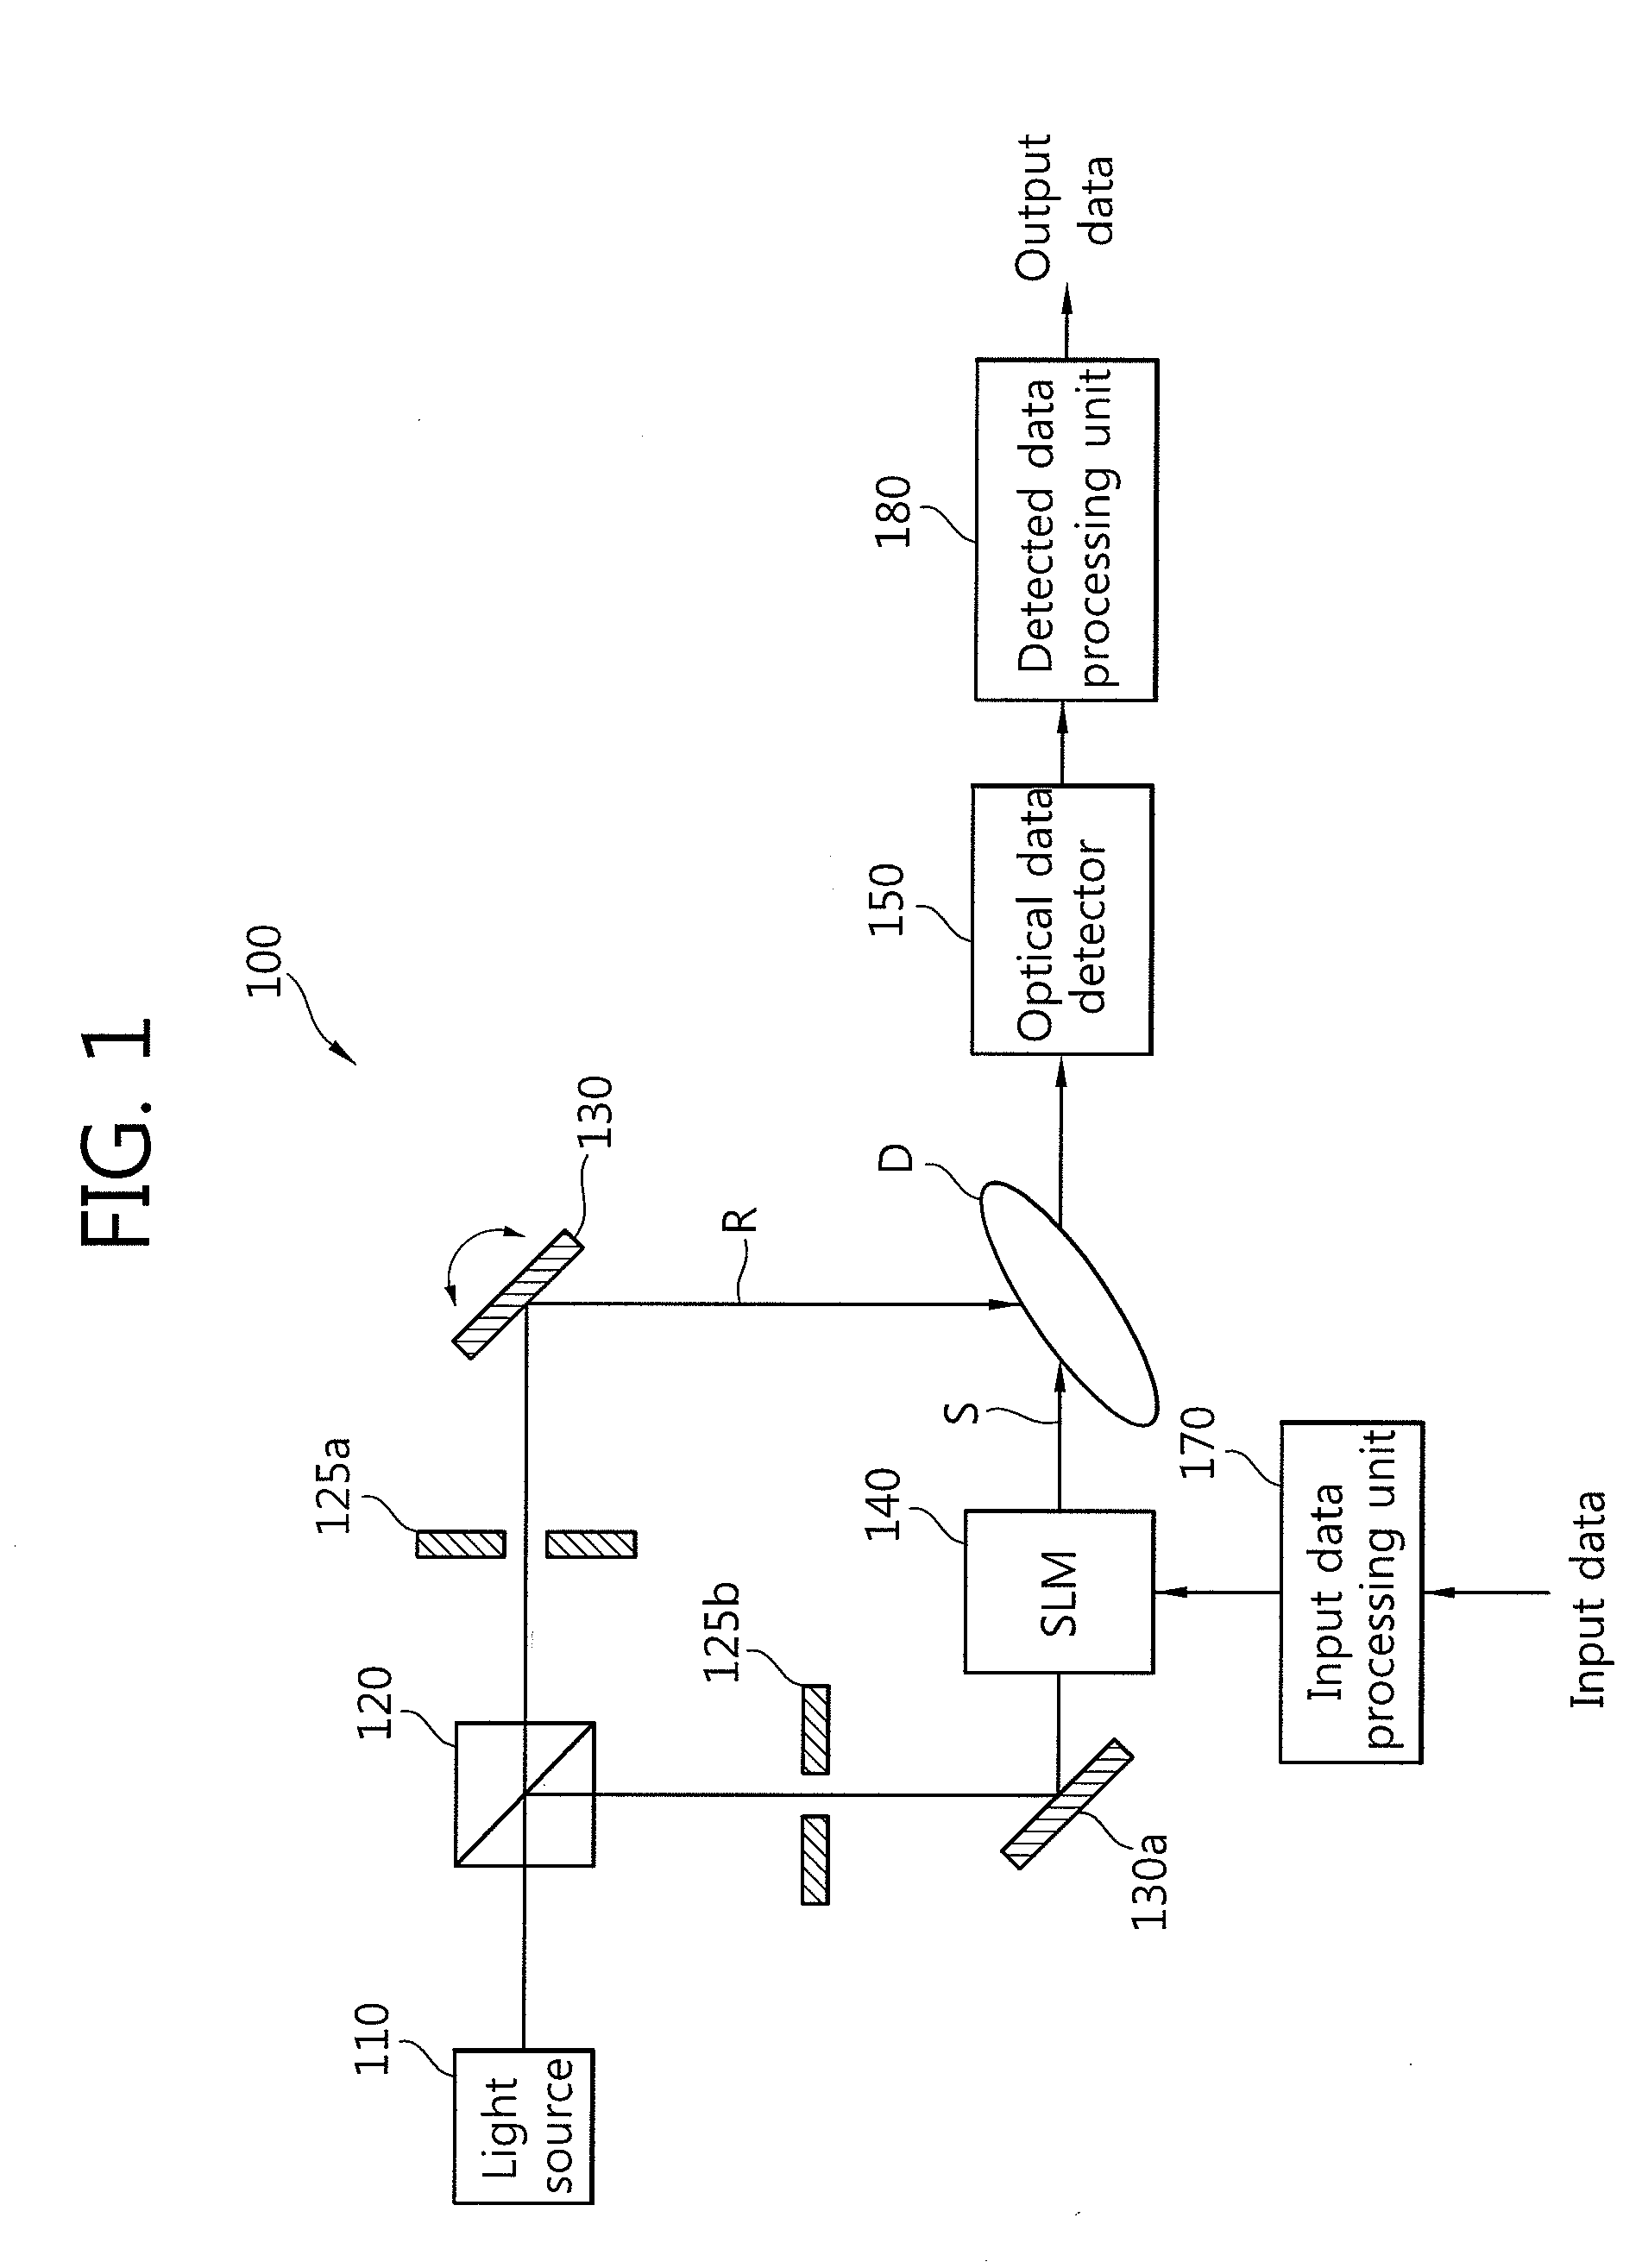 Method for detecting pattern of over-sampling image and an optical information processing apparatus and method using the same